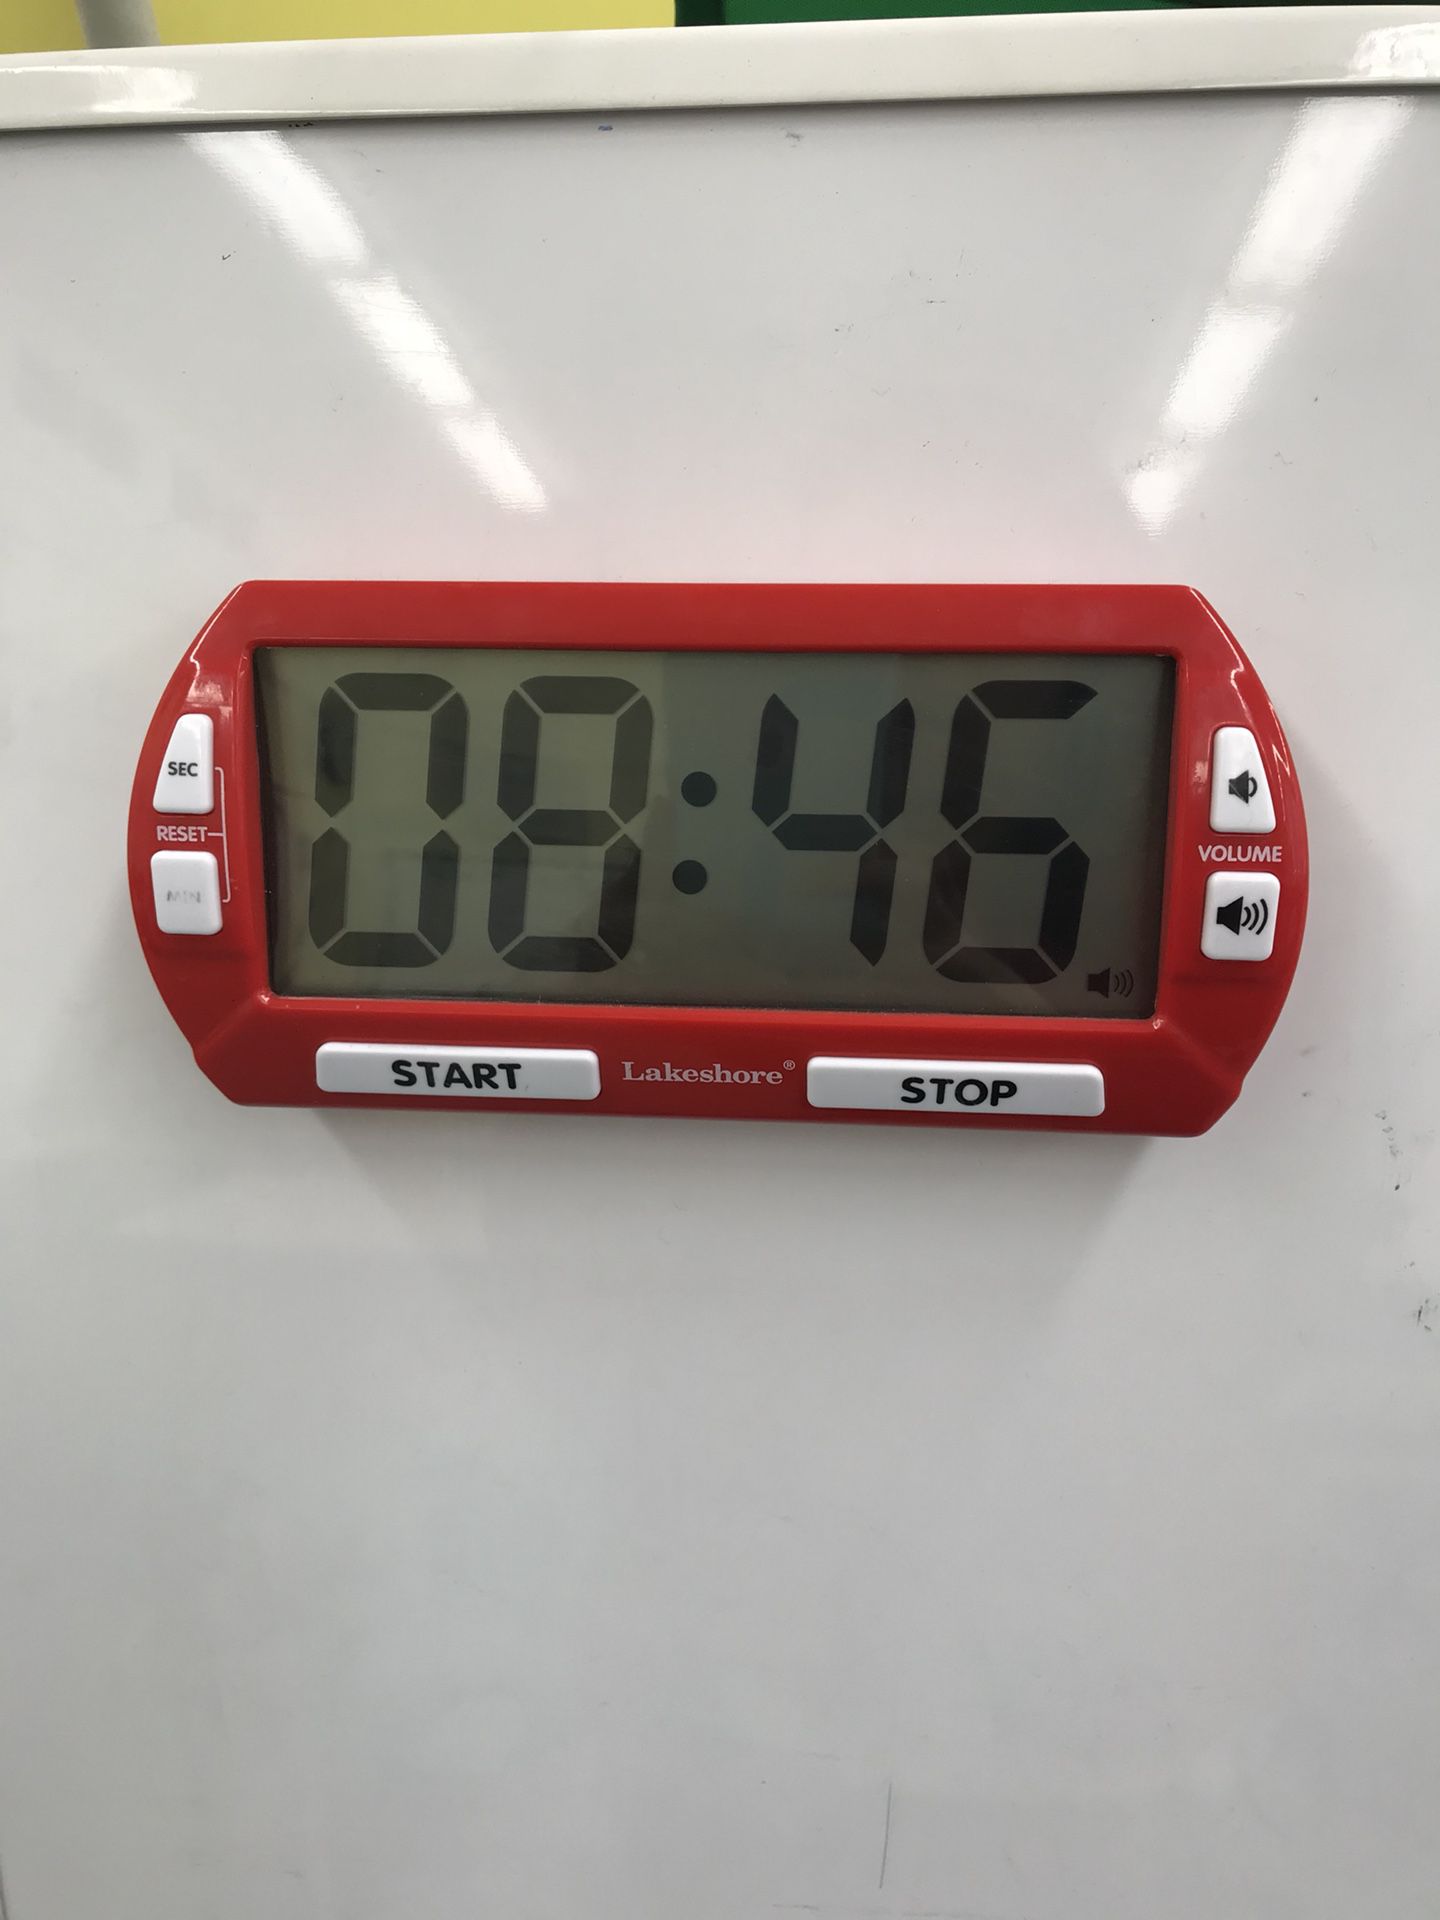 Our Giant Classroom Timer is an - Lakeshore Learning